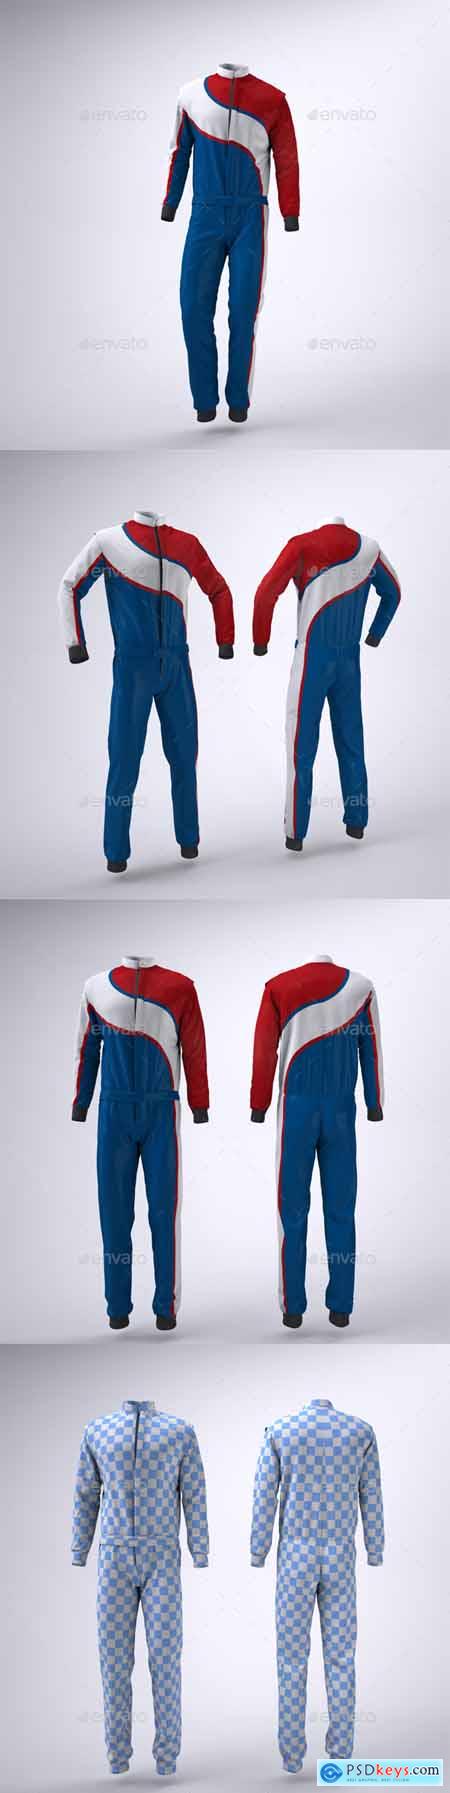 Driving, Racing Suit Mock-Up 21381173